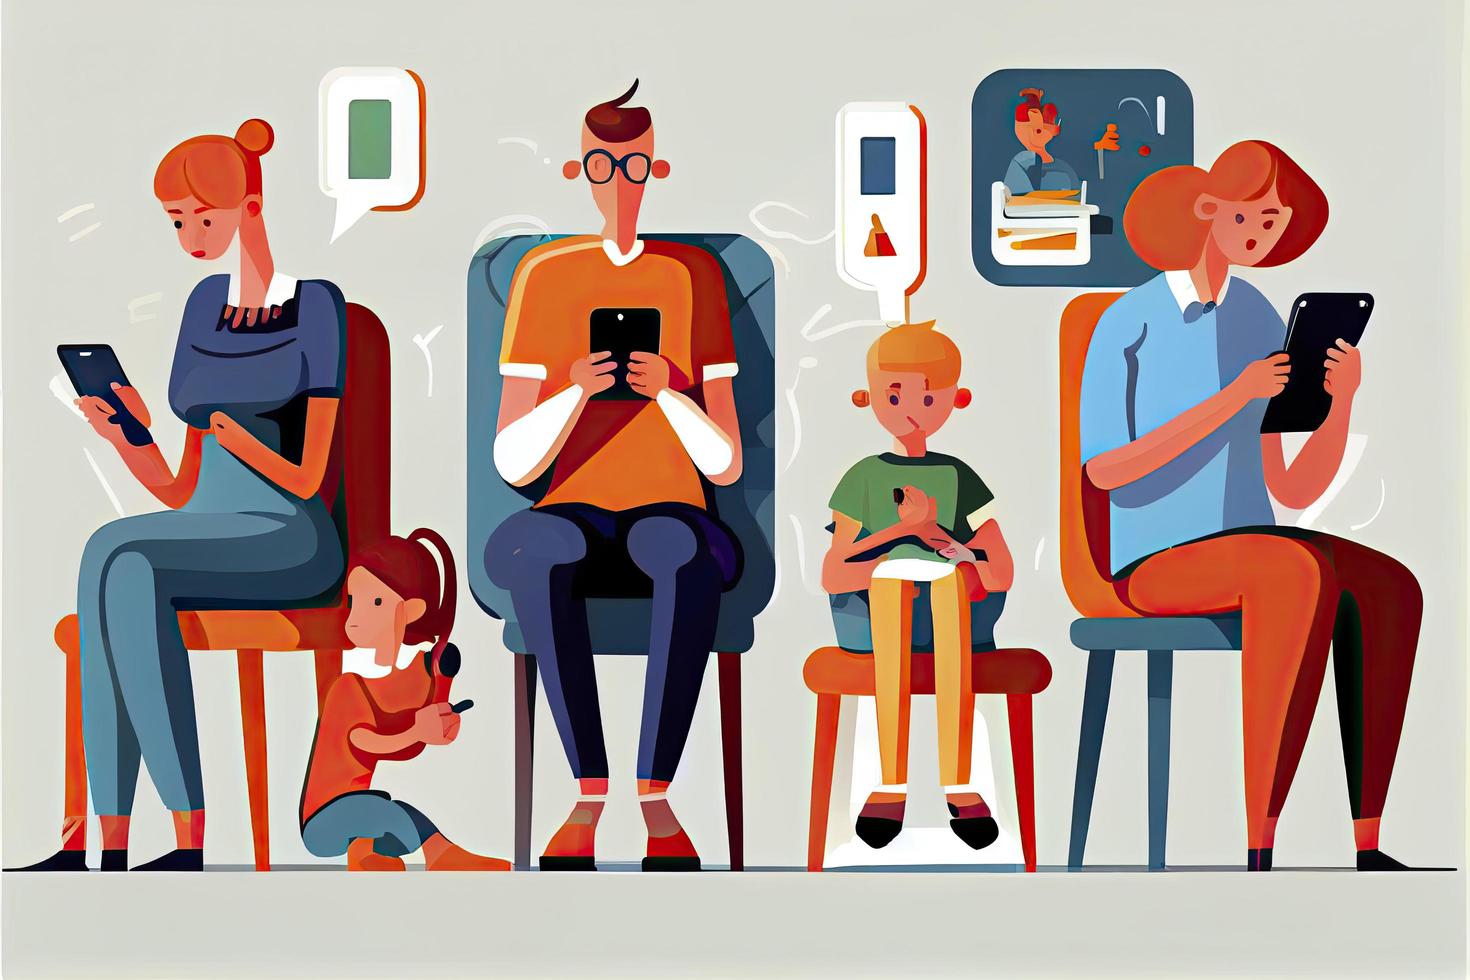 Family using smartphones and tablets, parents and kids with phones. Social media addiction photo